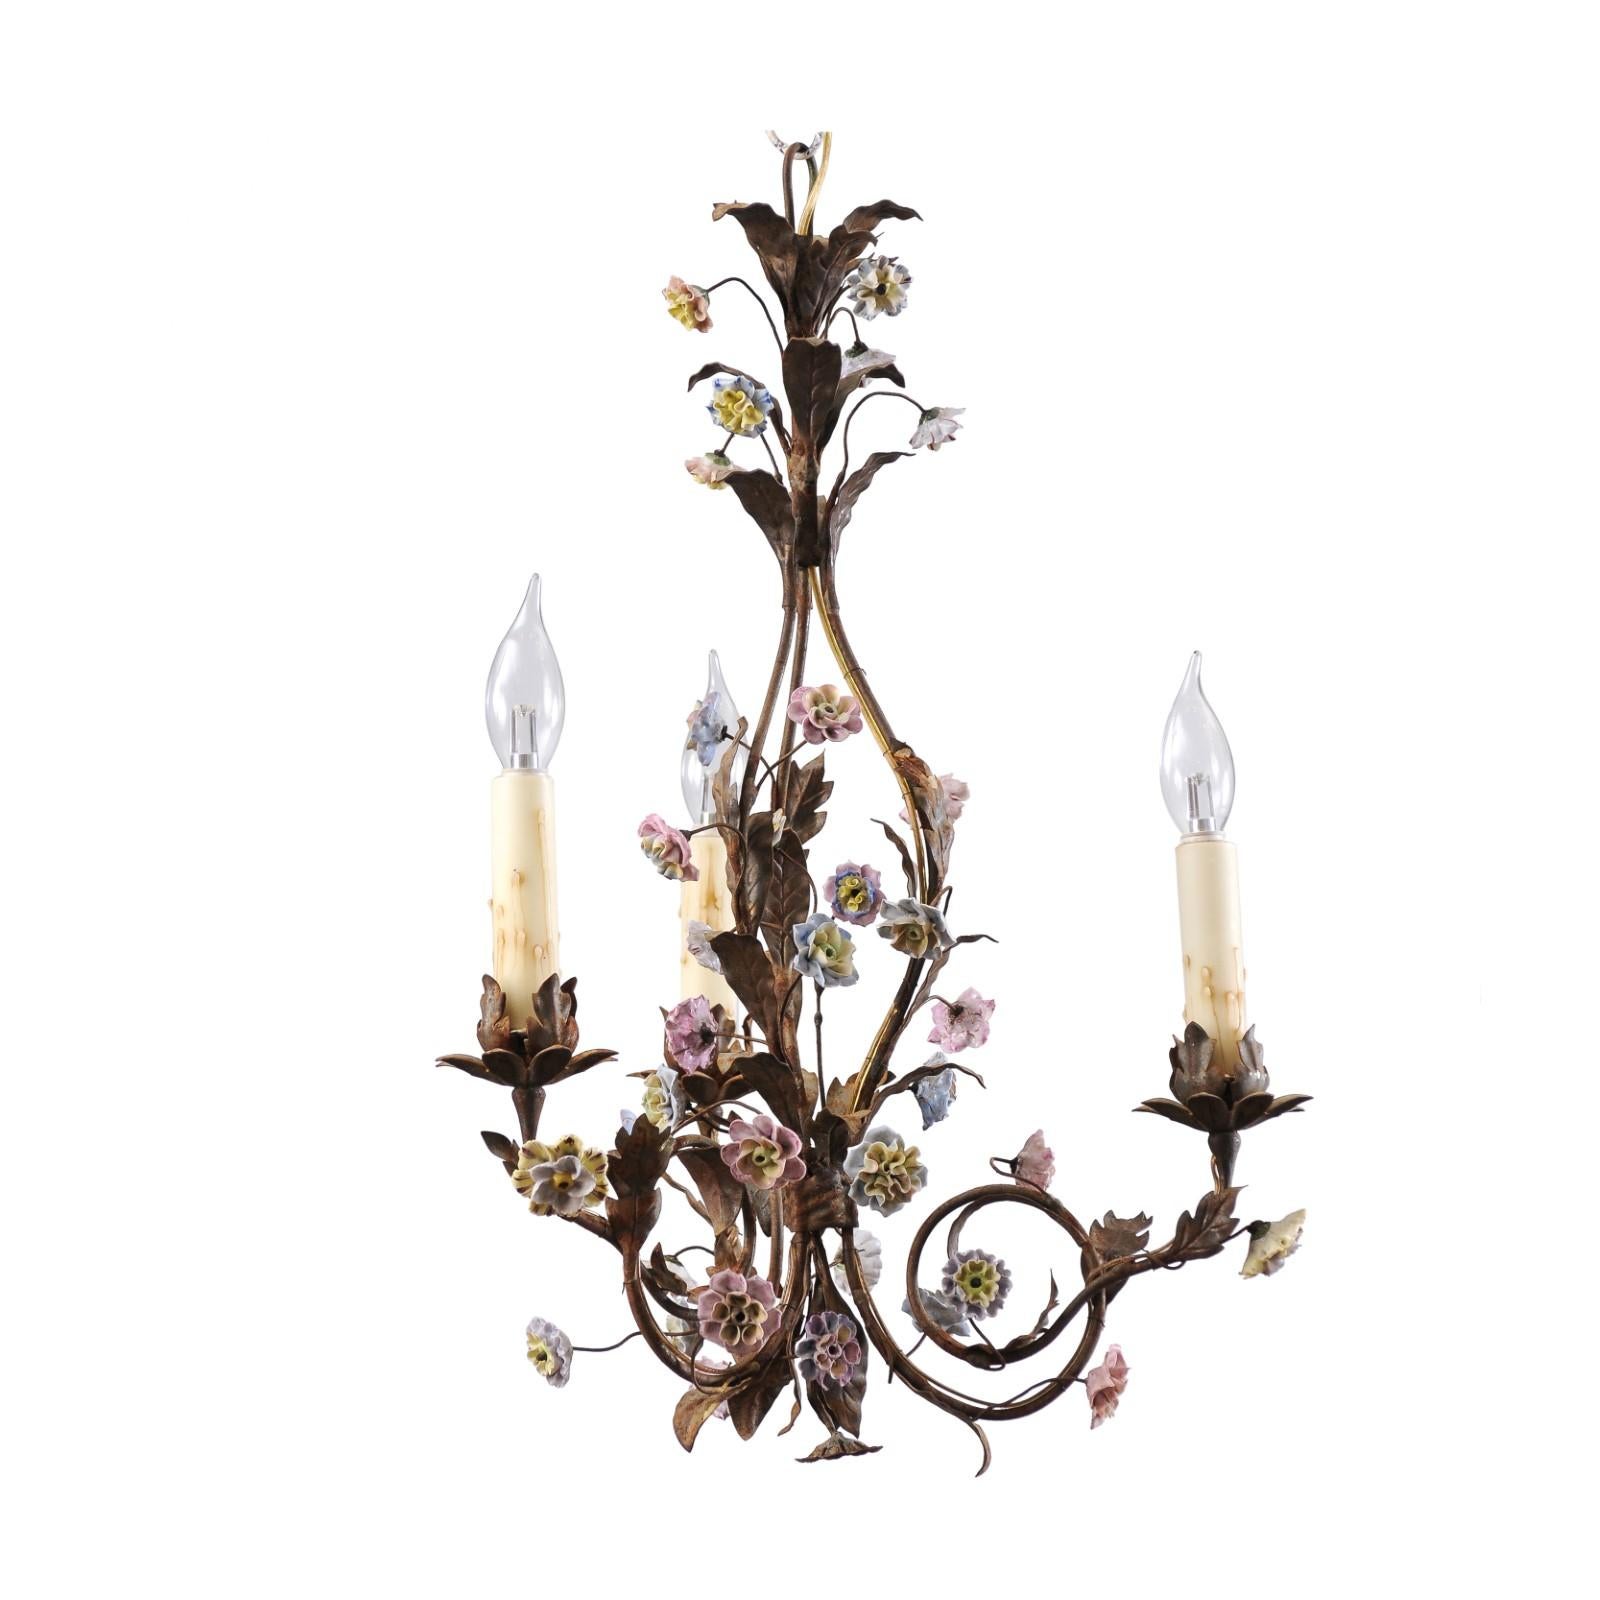 A French Baroque style three-light chandelier from the 20th century with pink and blue flowers, rewired for the USA. This French Baroque style chandelier, hailing from the 20th century, is a picturesque amalgamation of elegance and artisan